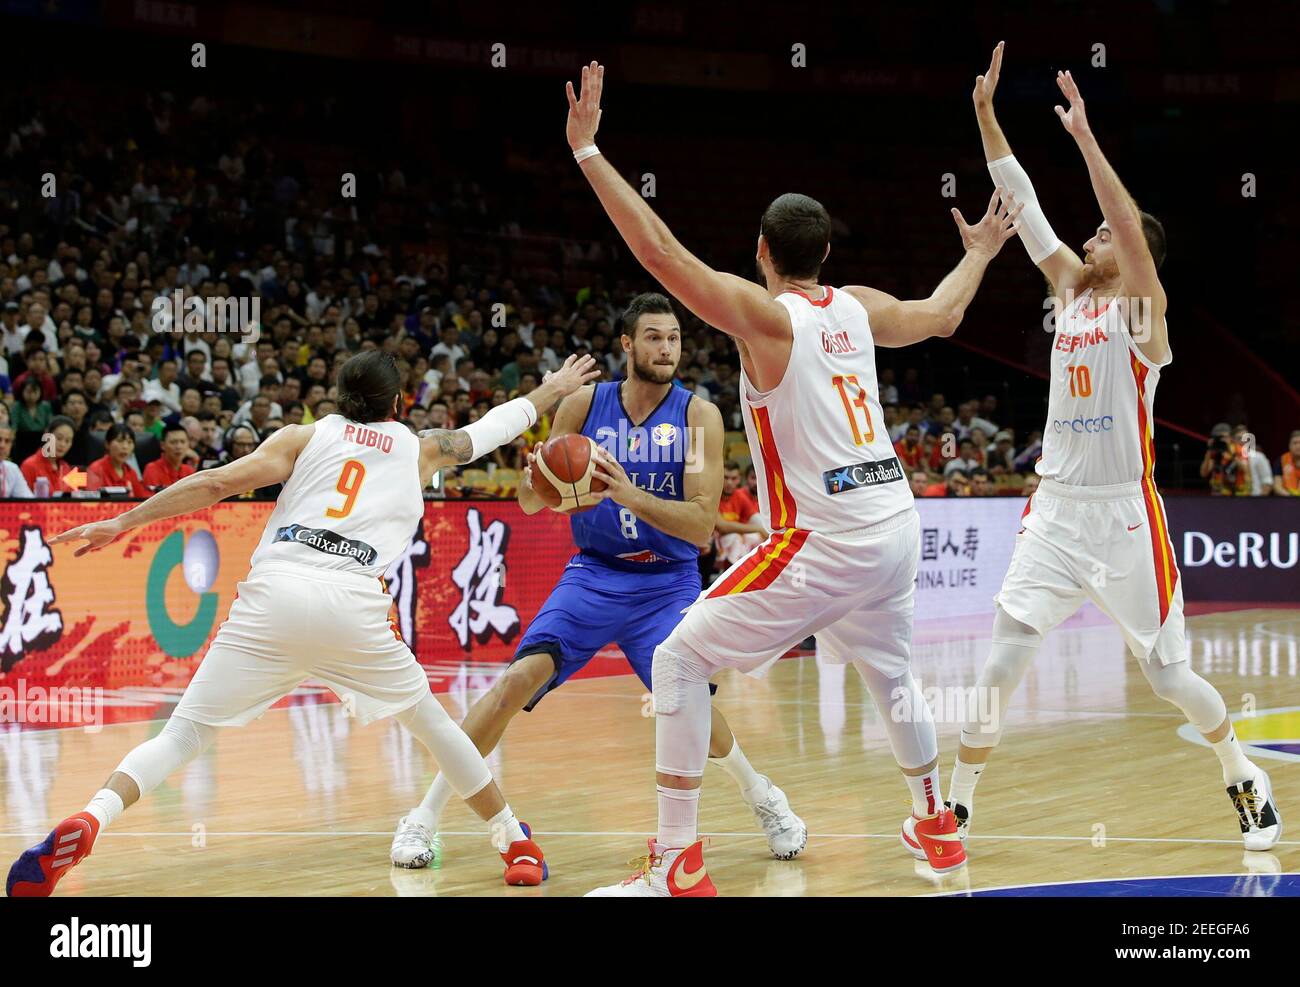 Basketball - FIBA World Cup - Second Round - Group J - Spain v Italy - Wuhan Sports Centre, Wuhan, China - September 6, 2019 Italy's Danilo Gallinari in action with Spain's Ricky Rubio, Marc Gasol and Victor Claver REUTERS/Jason Lee Stock Photo